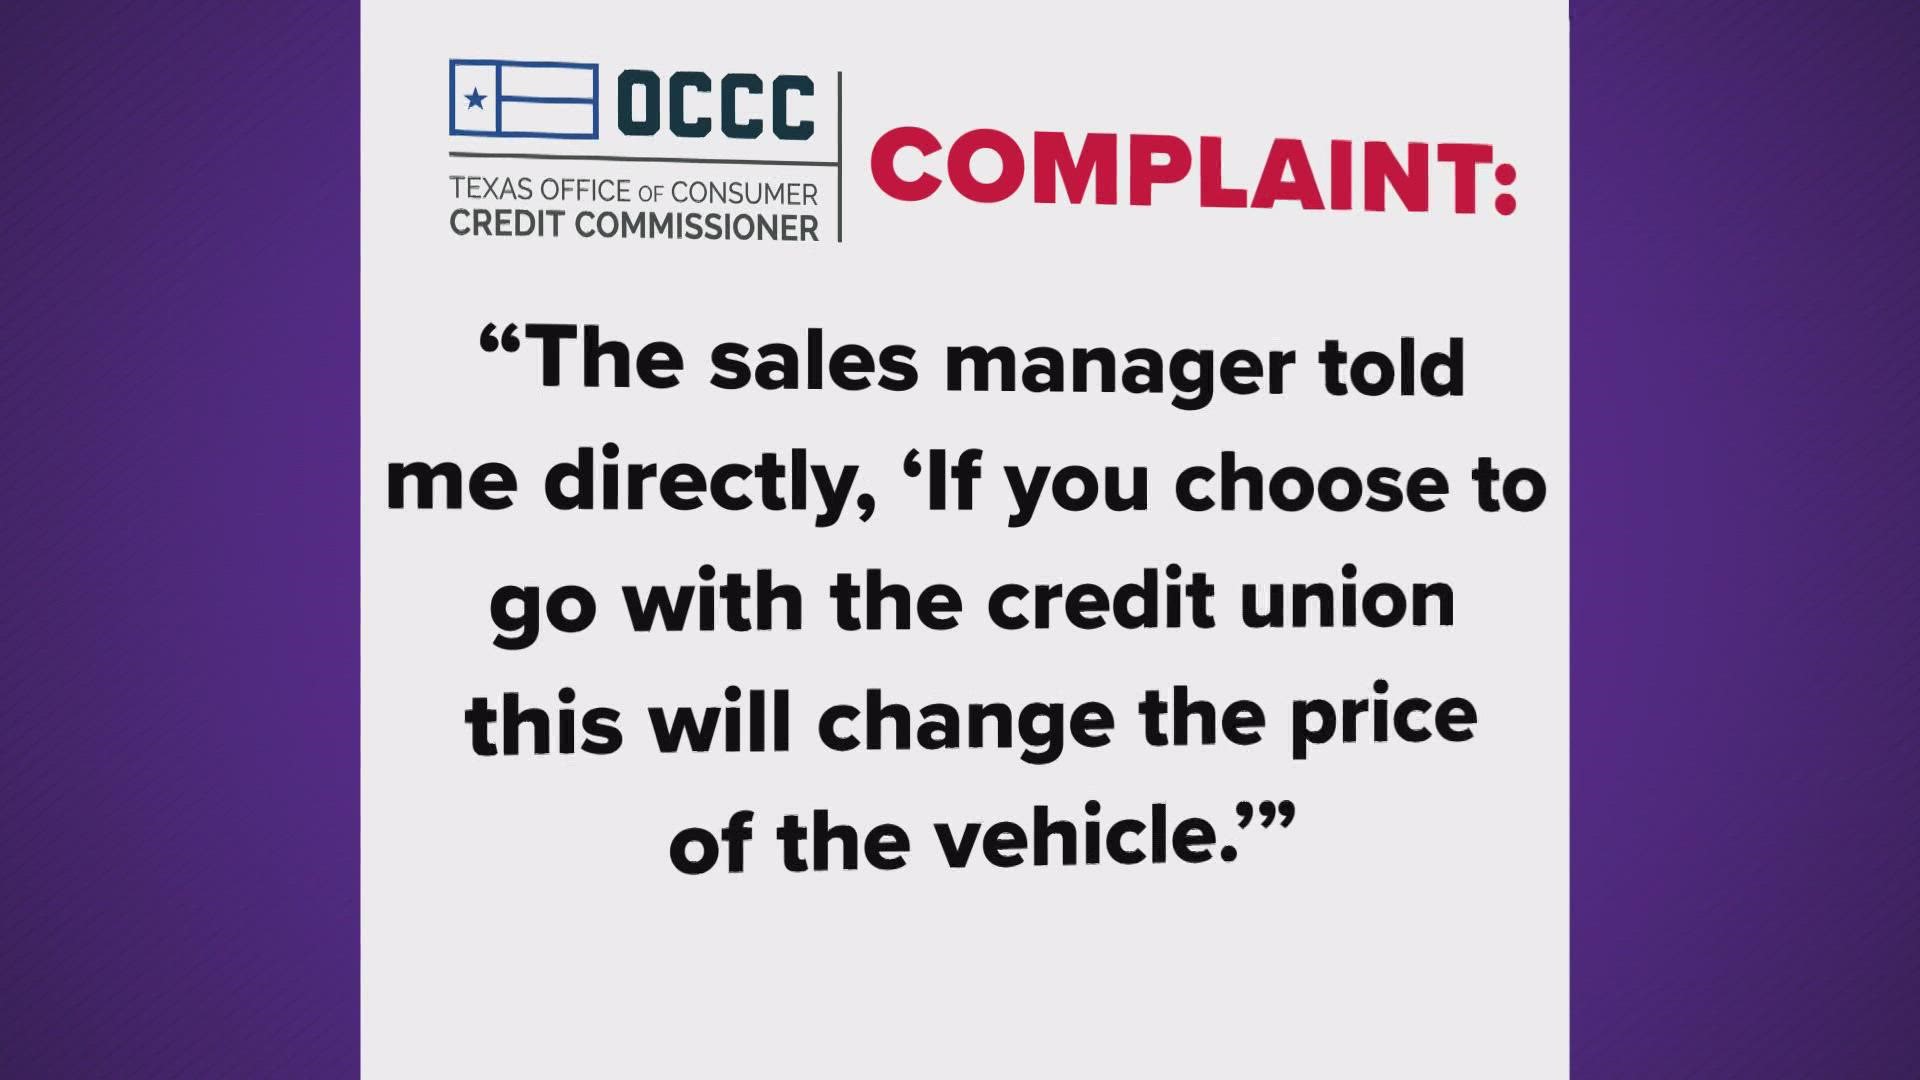 The dealer demands in the finance office are frustrating car buyers, who are already navigating lack of inventory and higher prices.